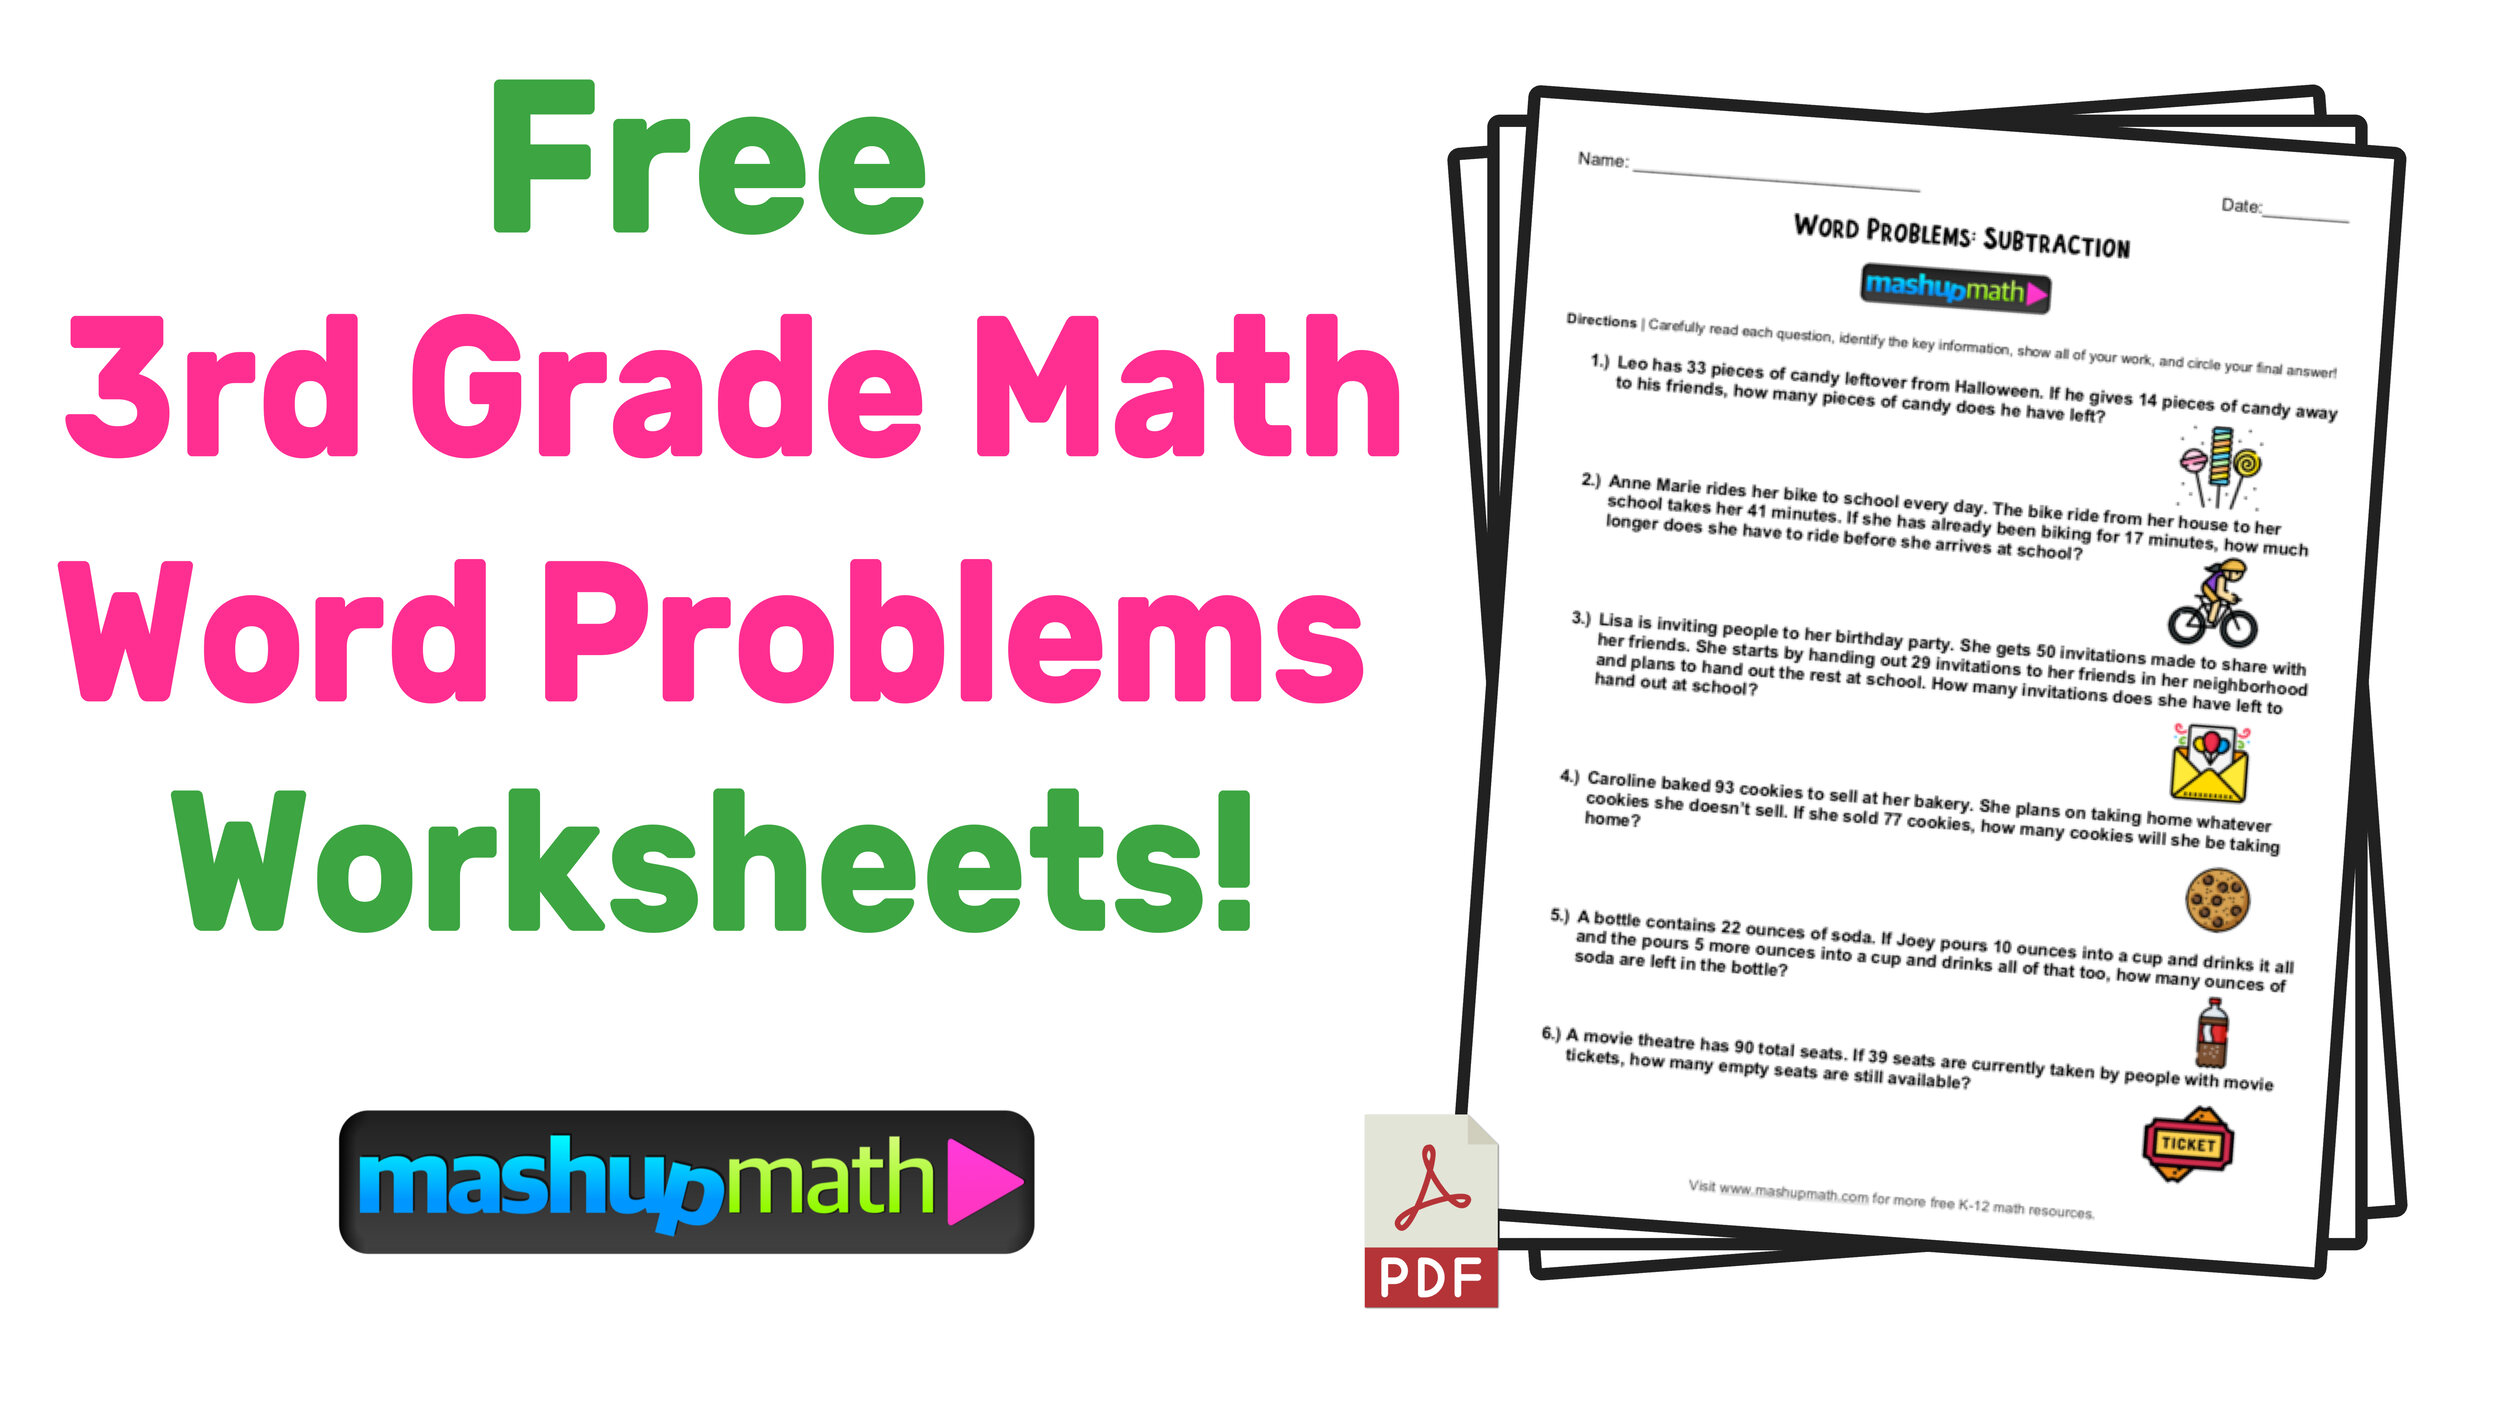 3rd Grade Math Word Problems: Free Worksheets with Answers  